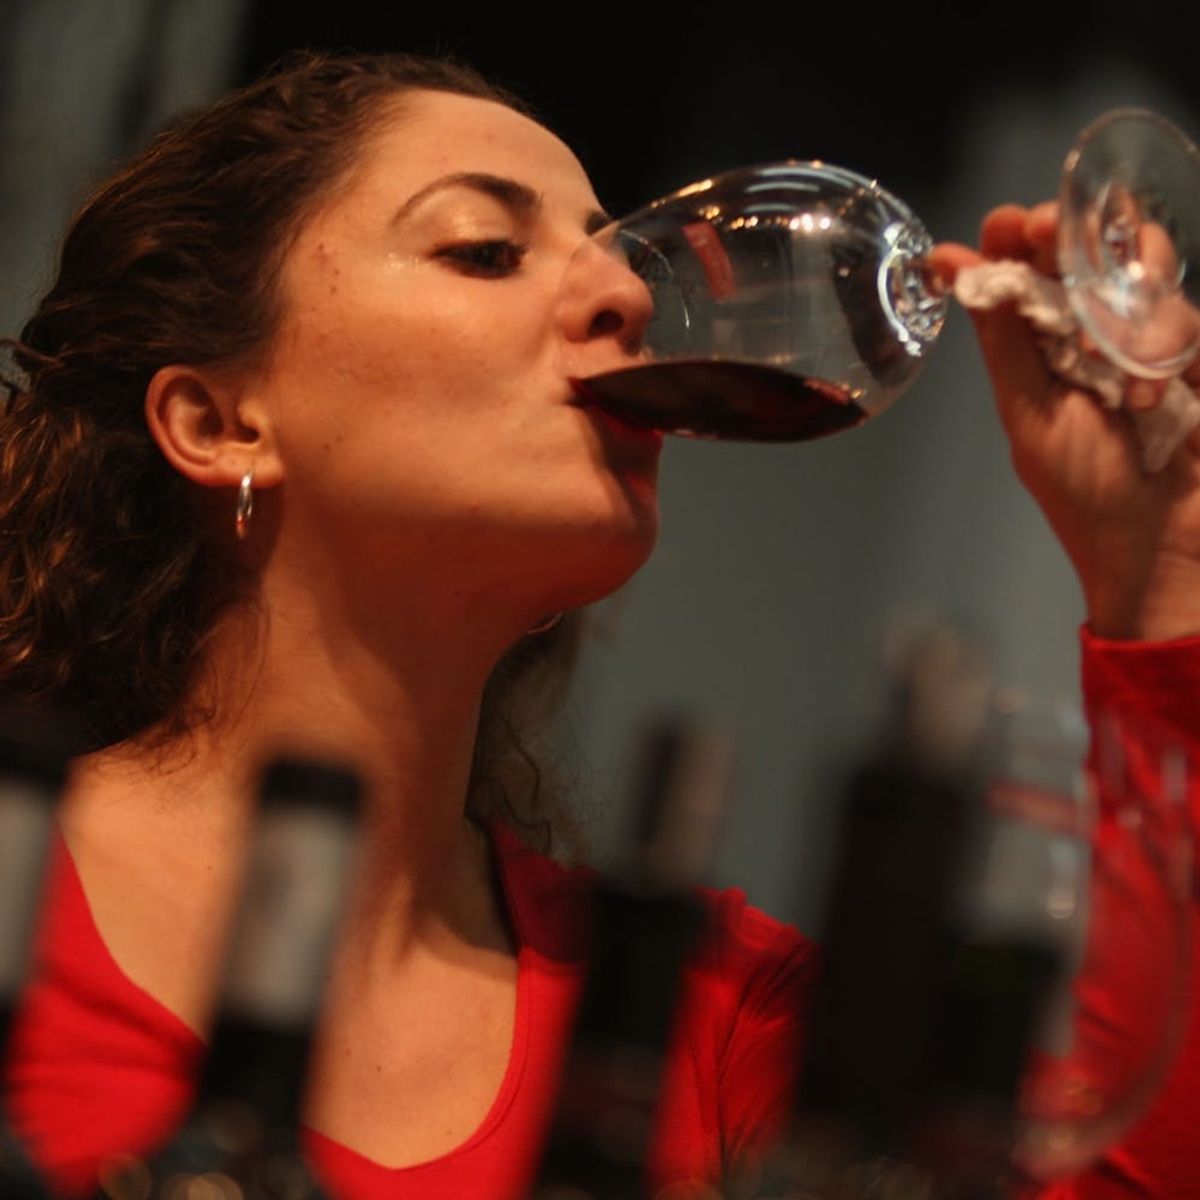 OMG: Science Says Drinking Wine Might Make You Smarter